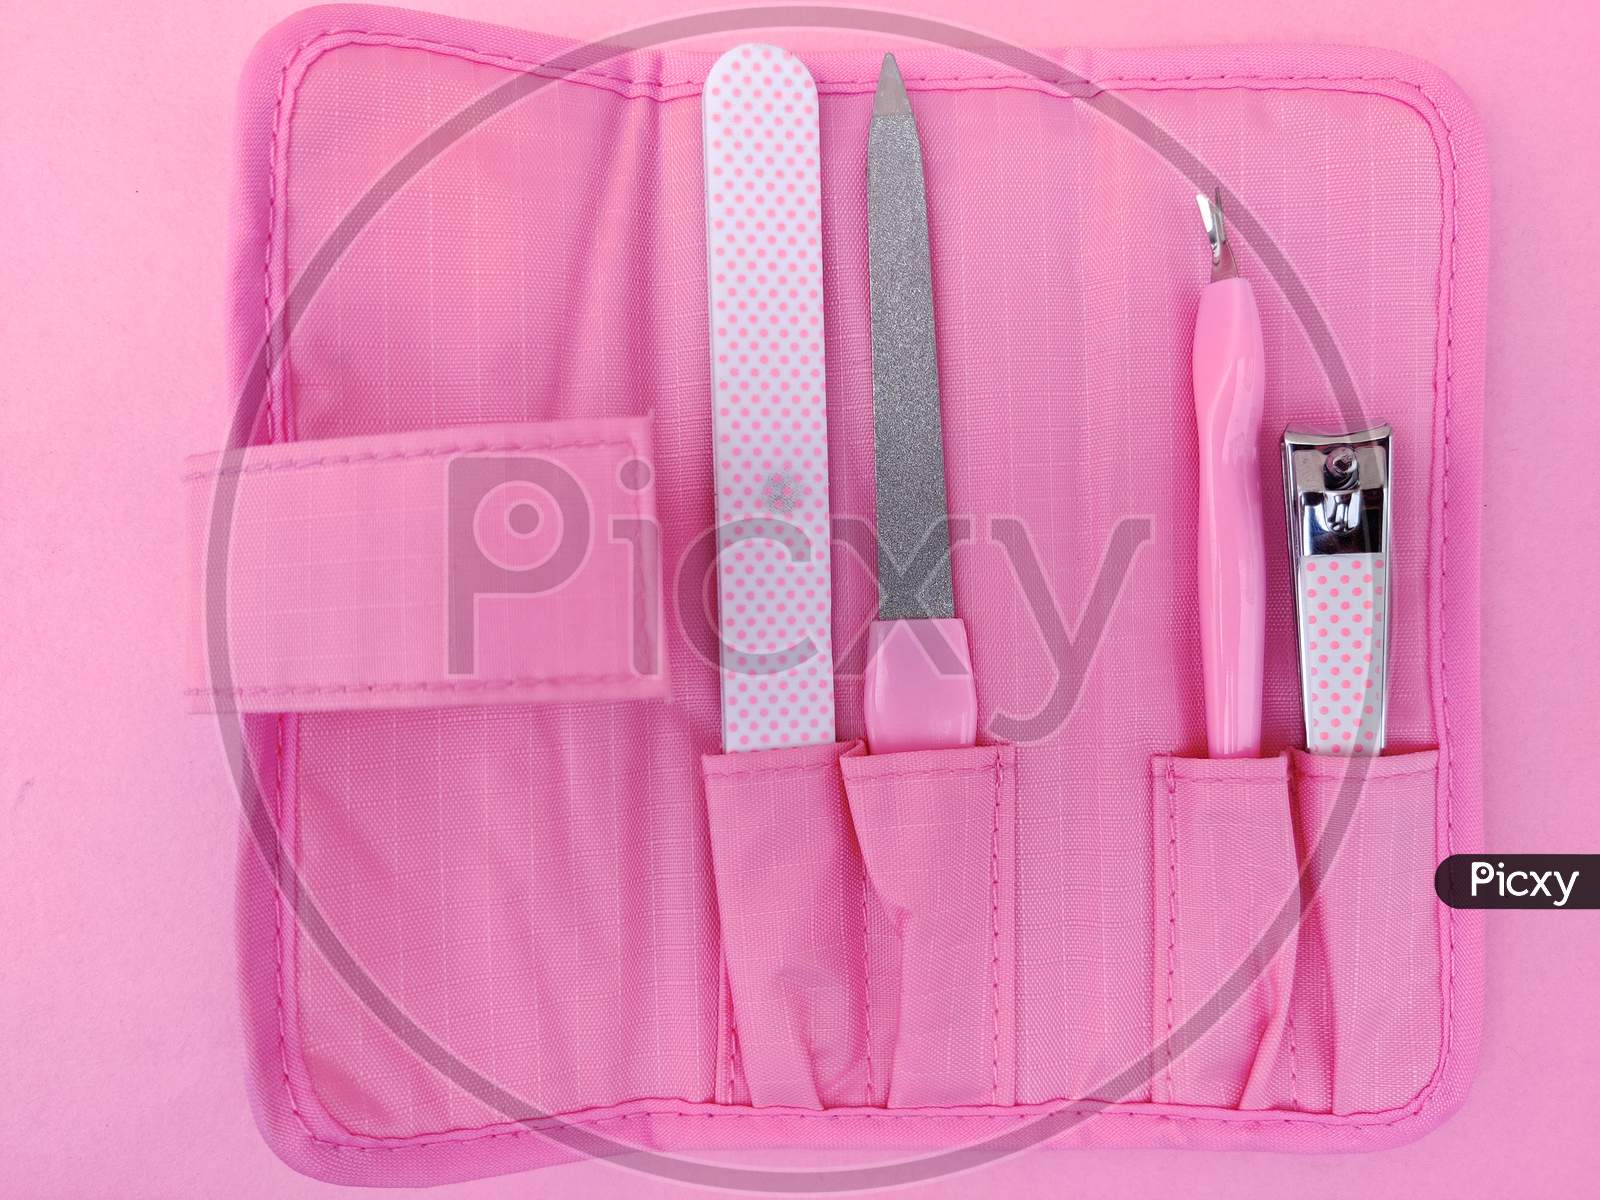 Set Of Pink Color Nail Clipper Or Manicure Tools In Pink Pouch.